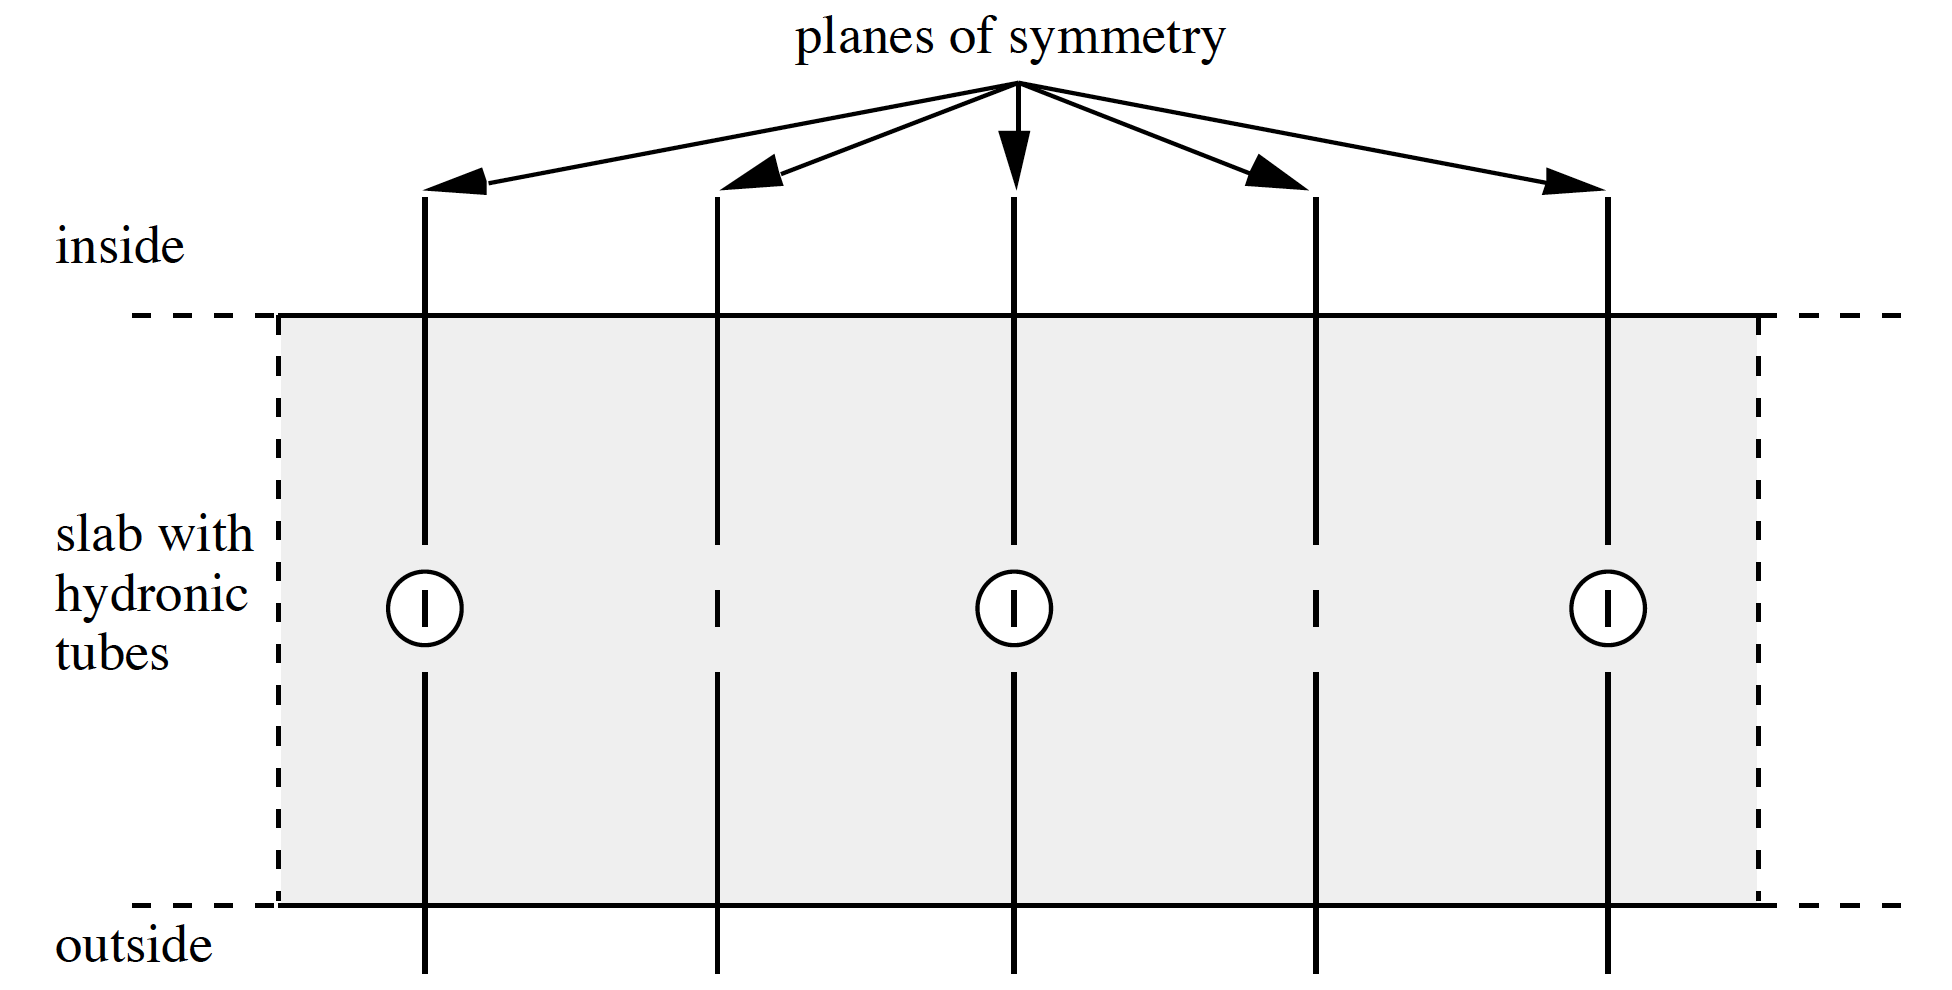 Cross Section of a Low Temperature Radiant System with Planes of Symmetry